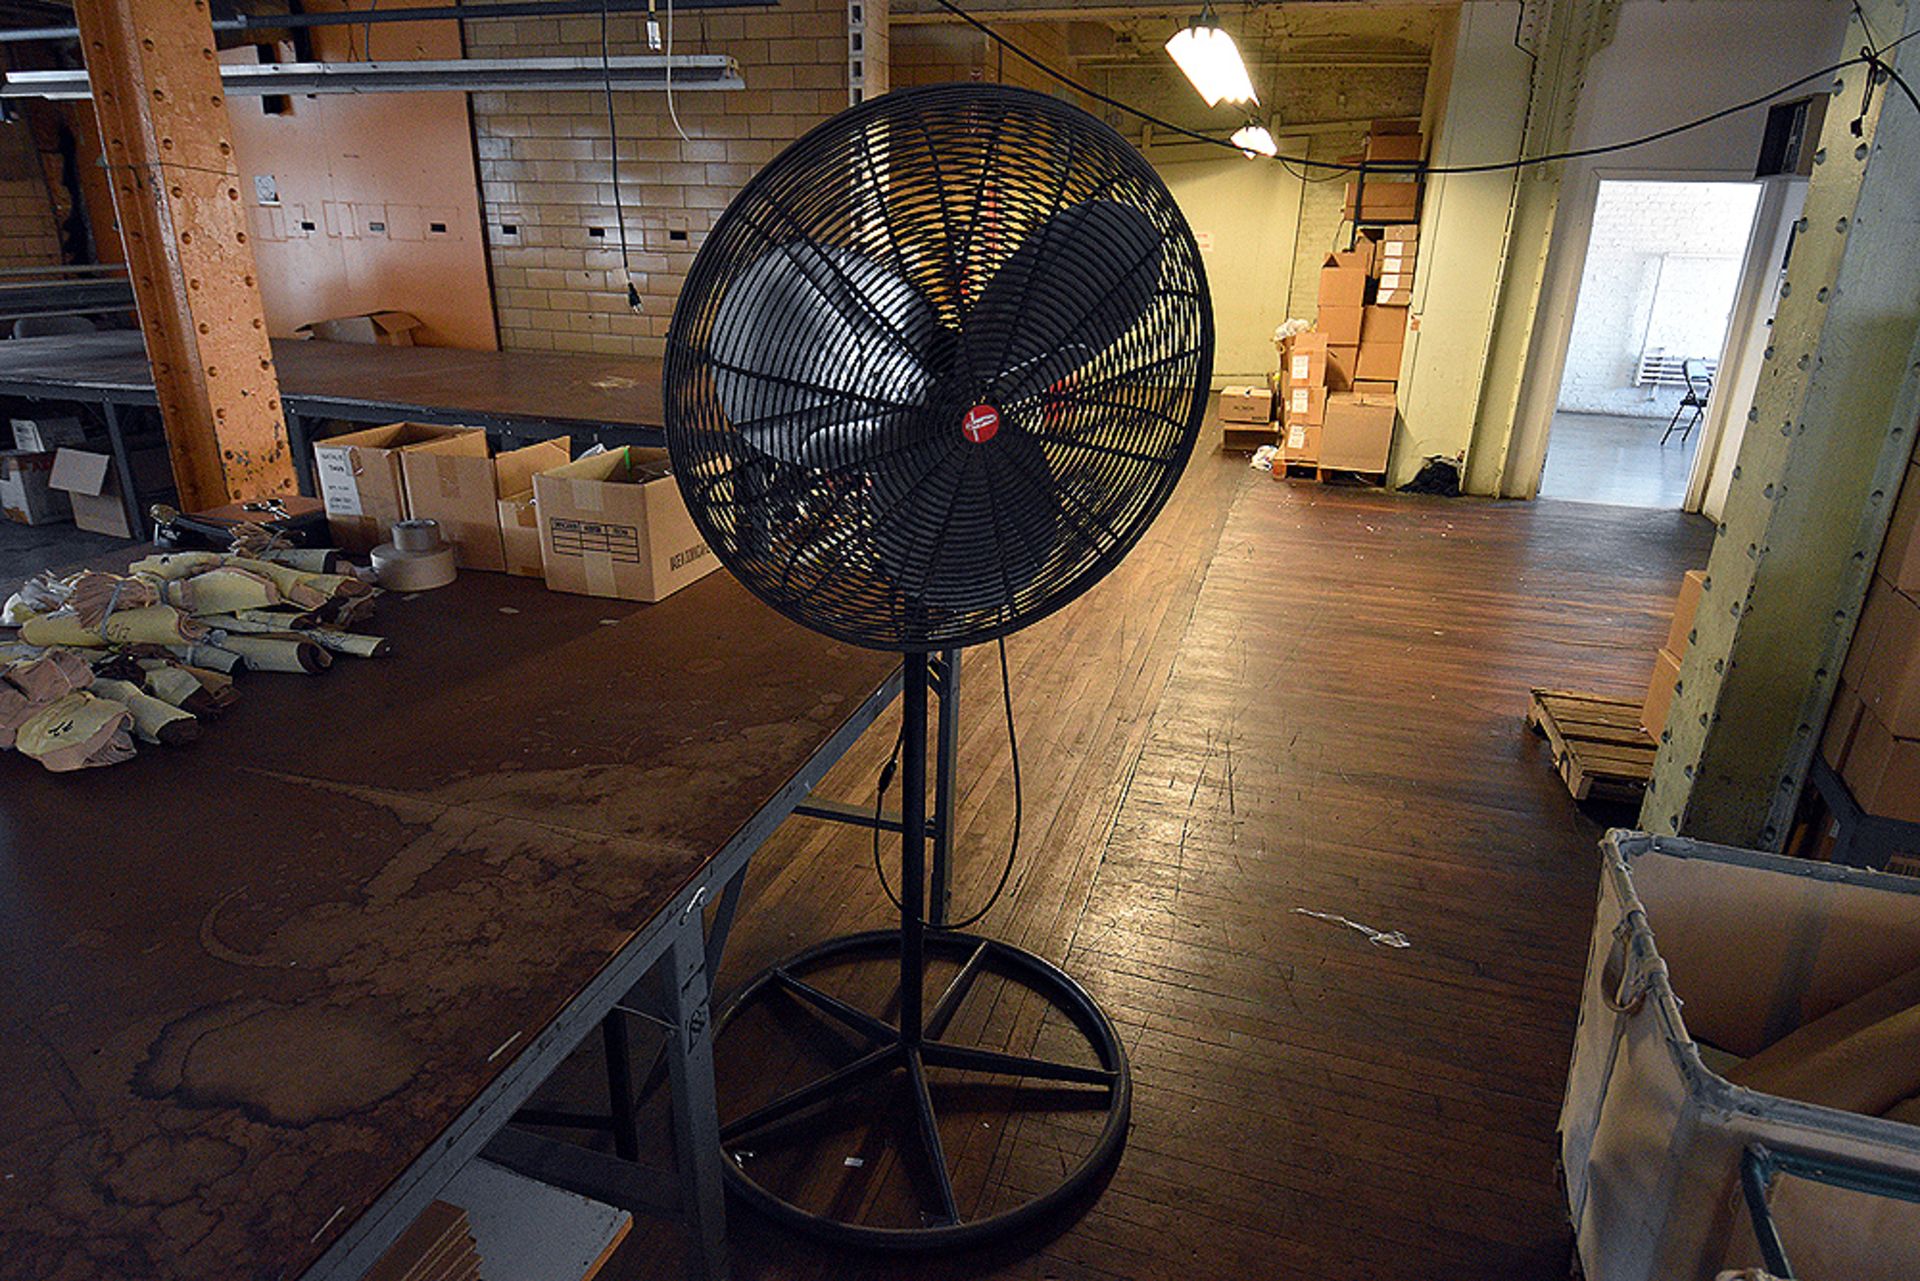 Ass't Industrial Fans (Global, Dayton, and Mach) - Image 2 of 4